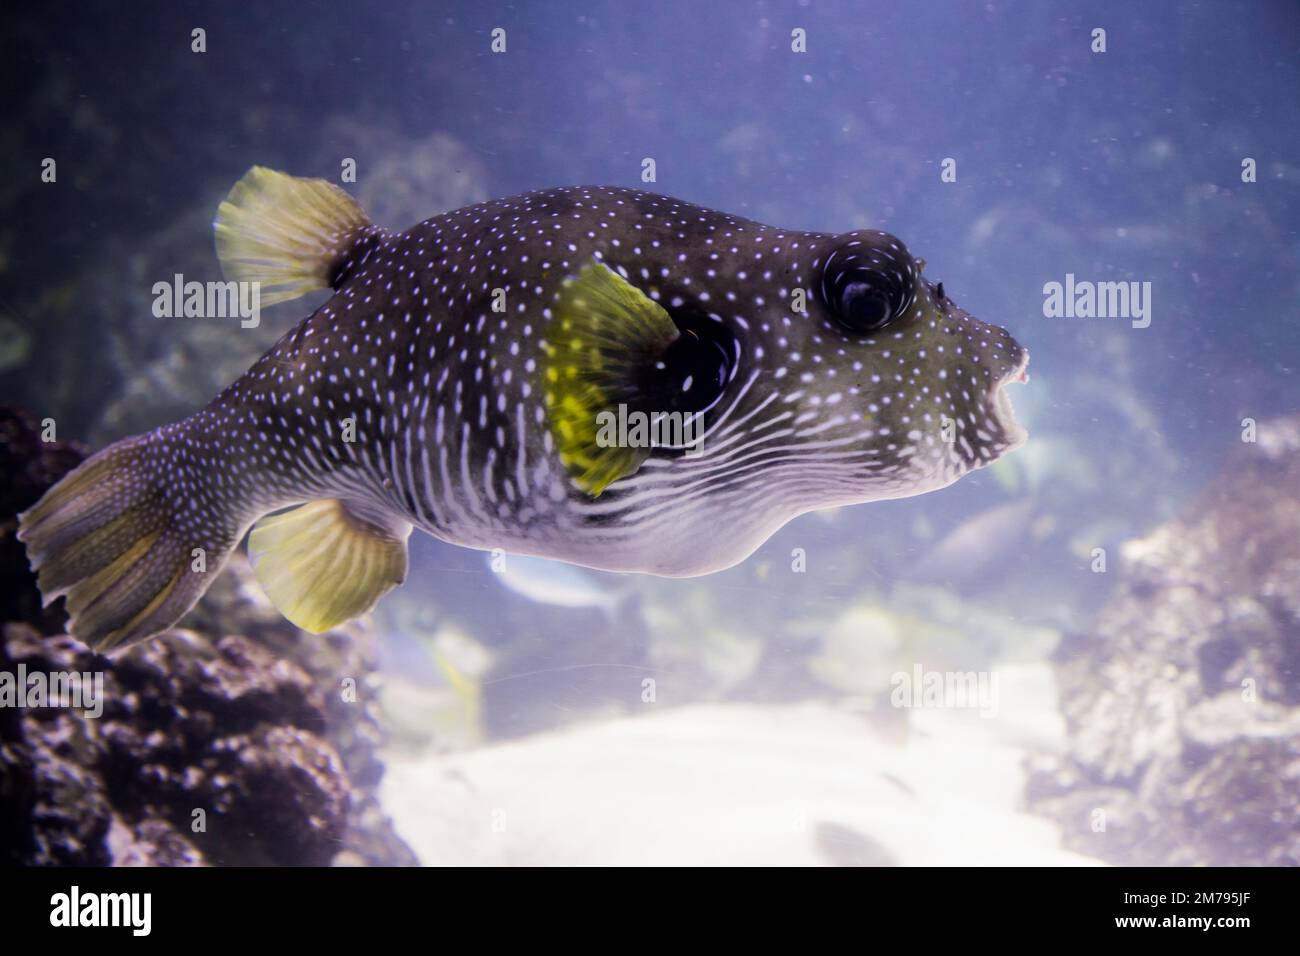 A White-spotted puffer fish, swimming among the rocks. He has bright white spots and yellow fins Stock Photo